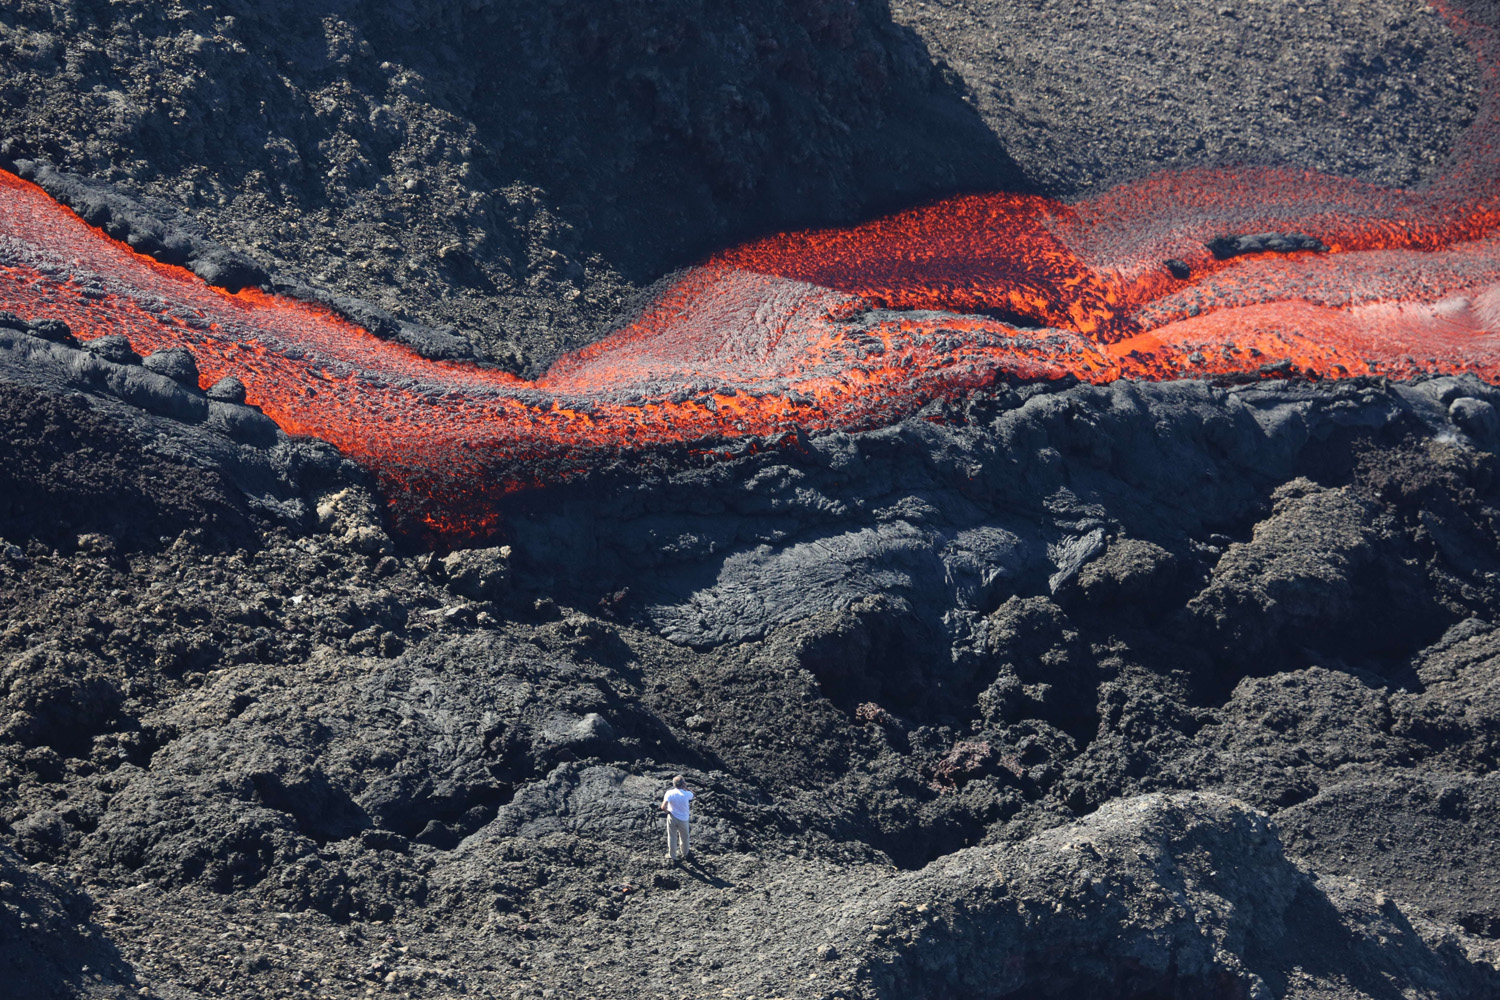 Lava flows out of the Piton de la Fournaise volcano, one of the world's most active volcanoes, located on the French island of La Reunion in the Indian Ocean, June 21, 2014.